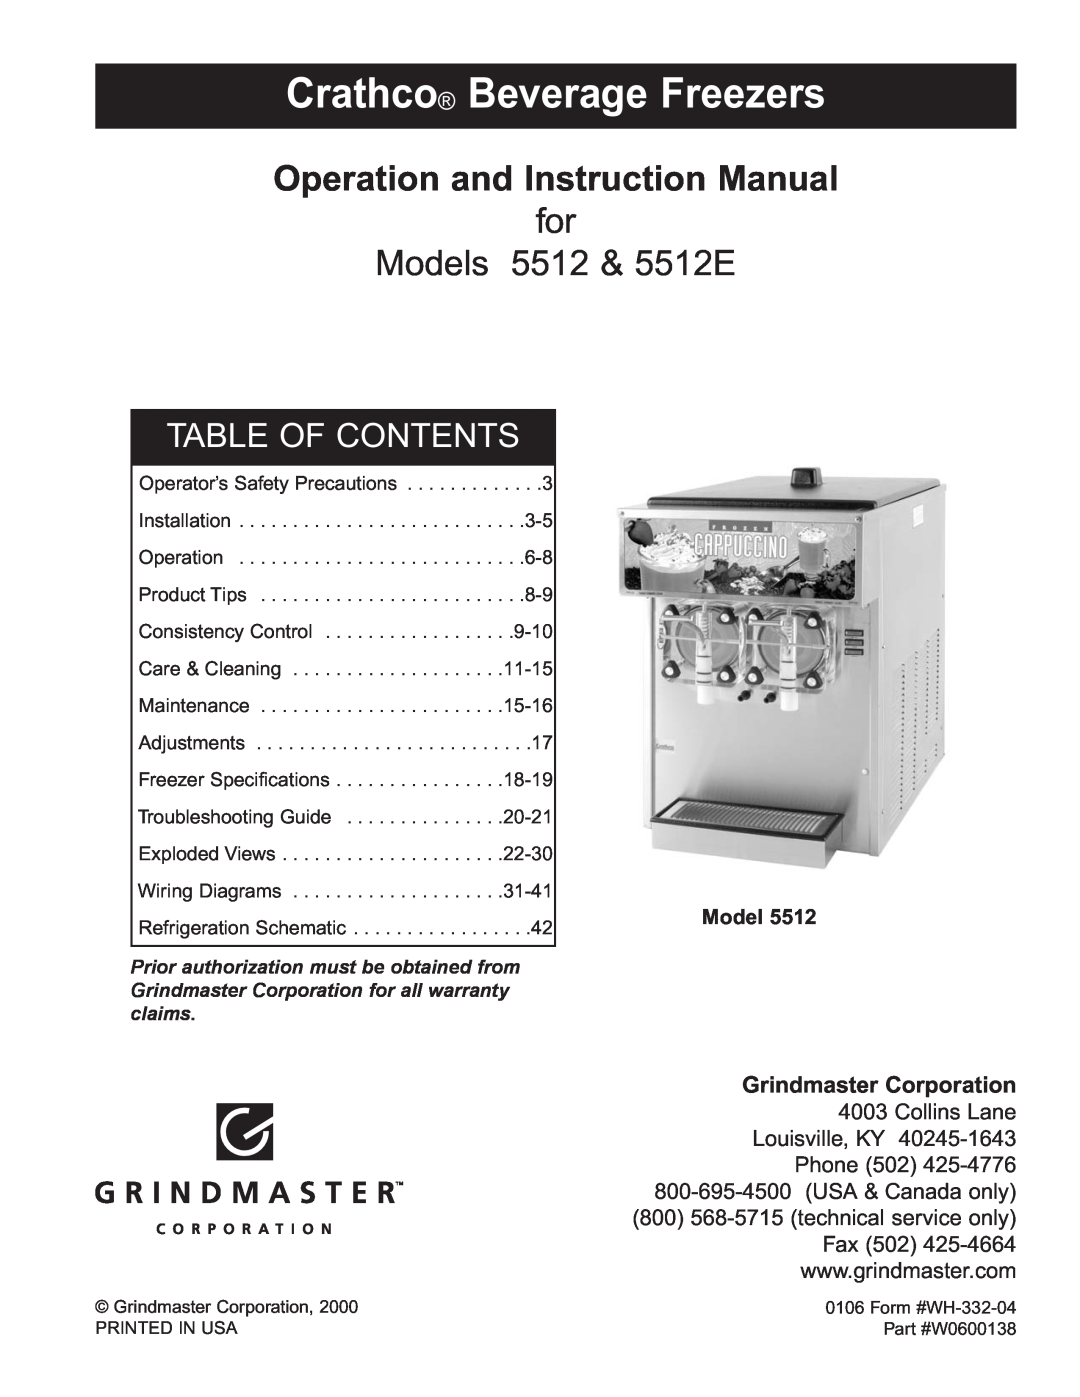 Grindmaster instruction manual Crathco Beverage Freezers, for Models 5512 & 5512E, Table Of Contents 